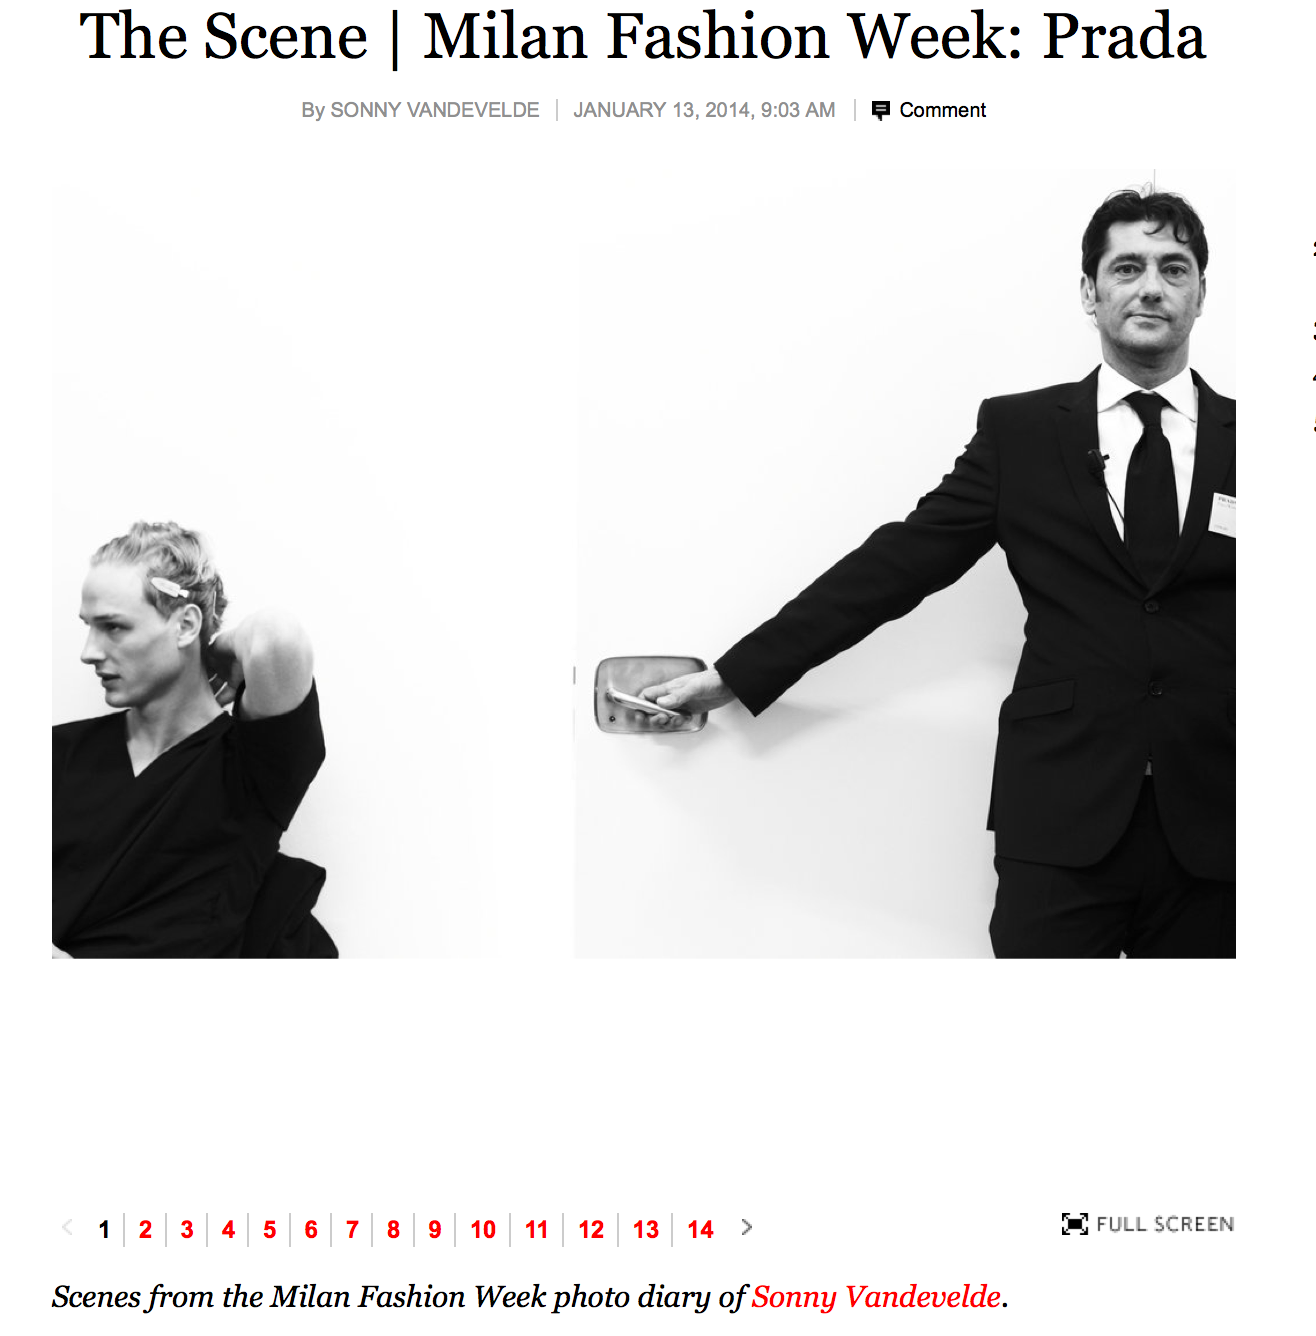 NYT Coverage I did of the Prada show